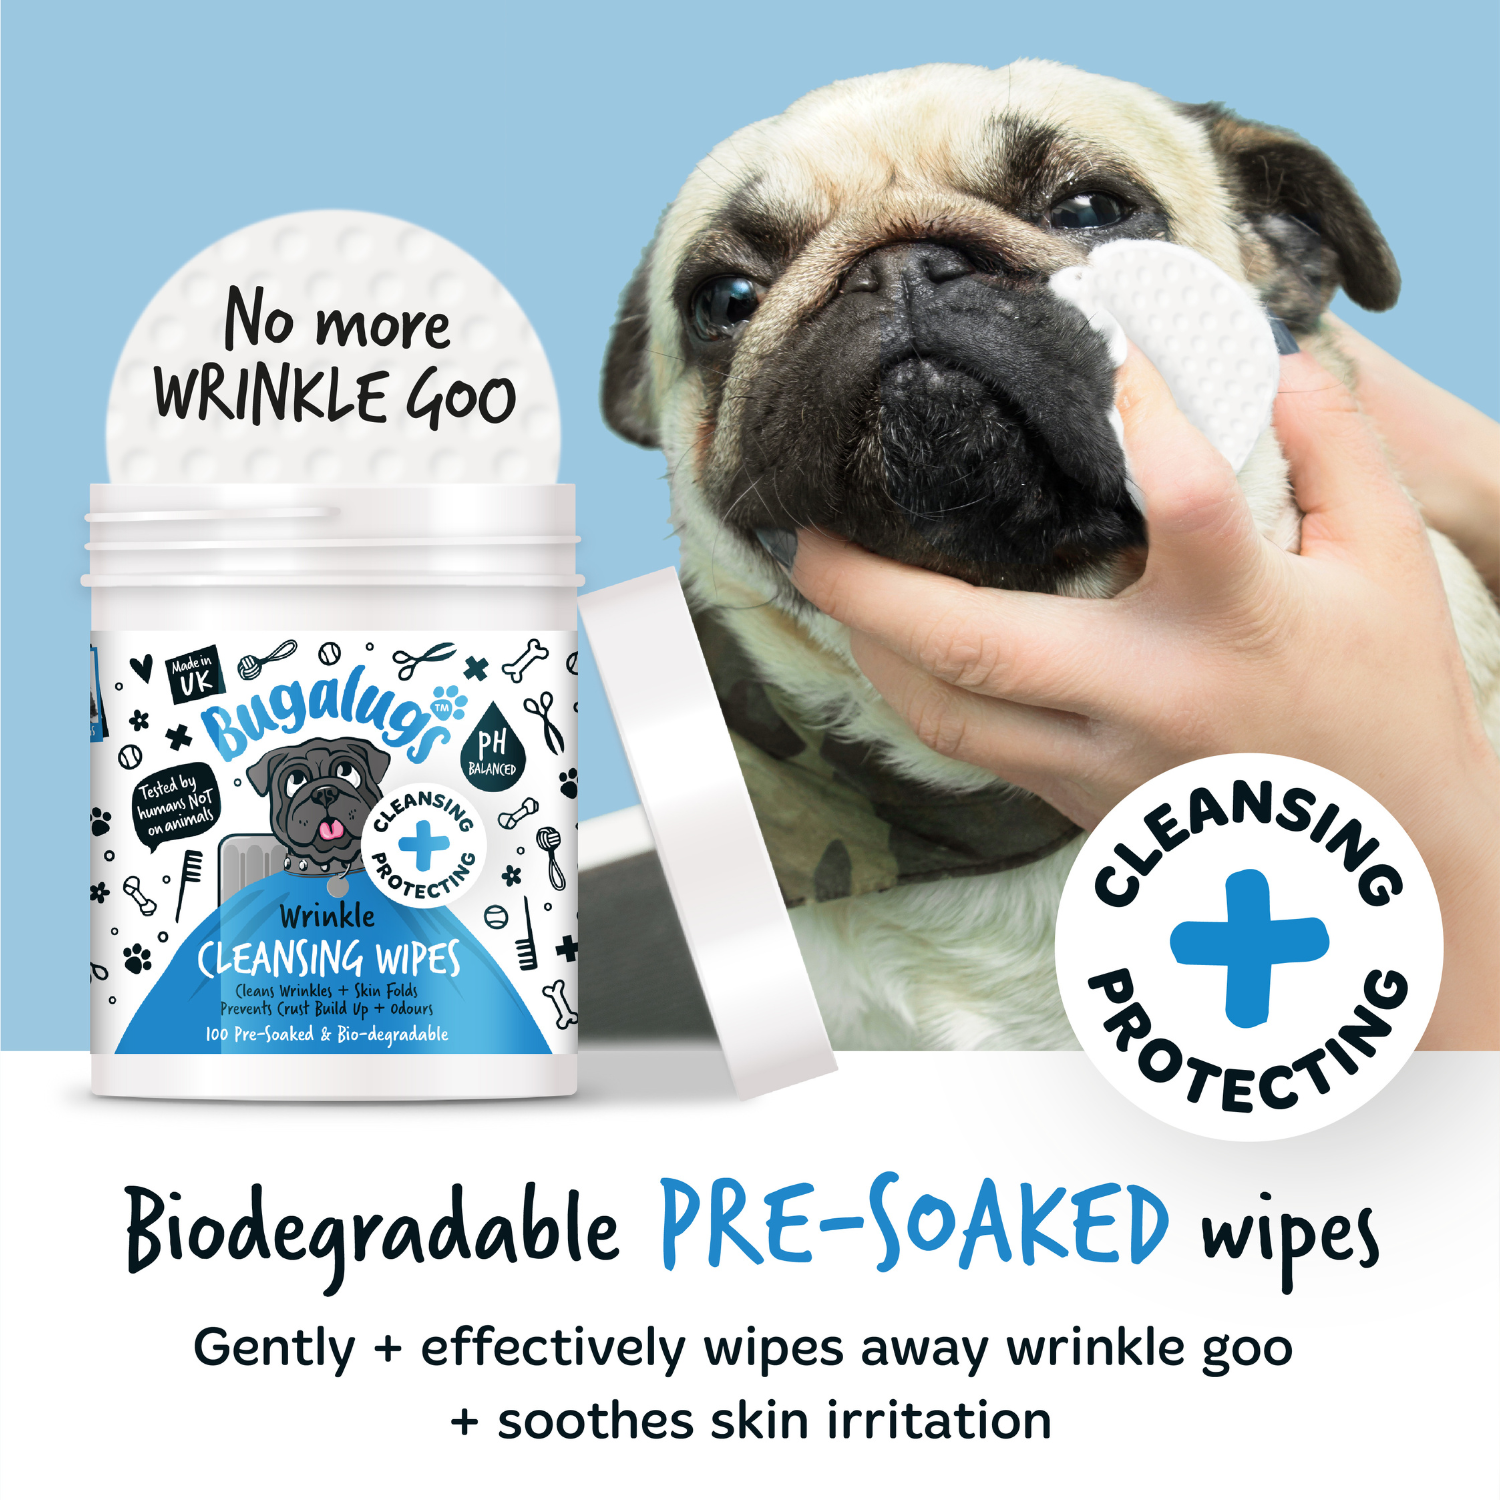 Bugalugs Wrinkle Cleansing Wipes - gentle and effectively wipes away wrinkle goo and soothes skin irritation